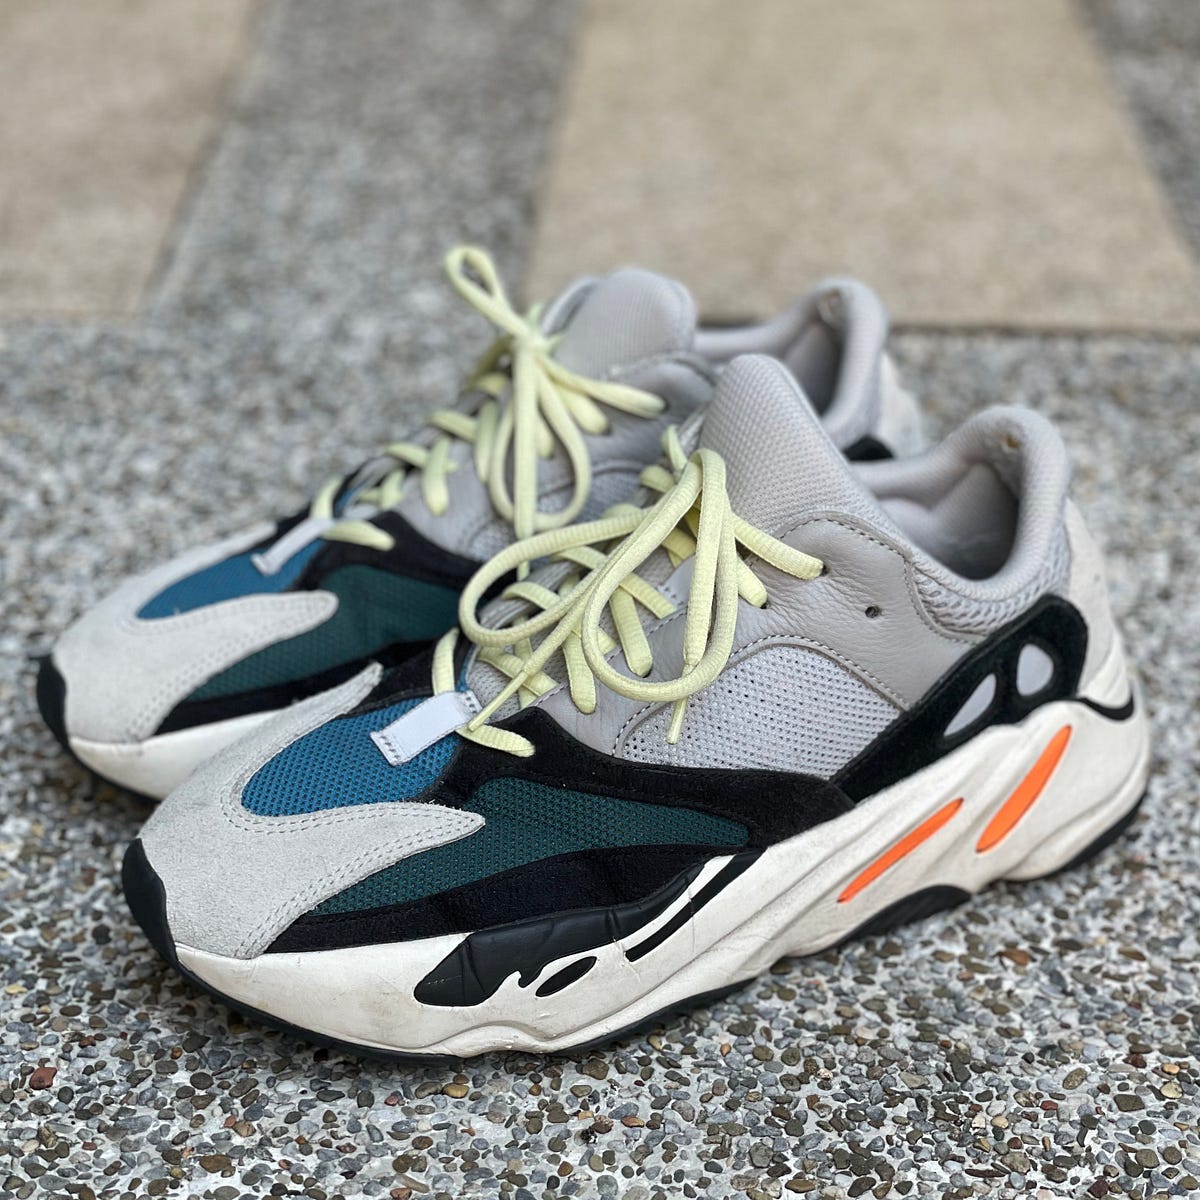 Residencia Acompañar preámbulo Long Term Sneaker Review: Yeezy Boost 700 Wave Runner Solid Grey (2 years)  | by Jasper Chou | Medium | Add_Space^